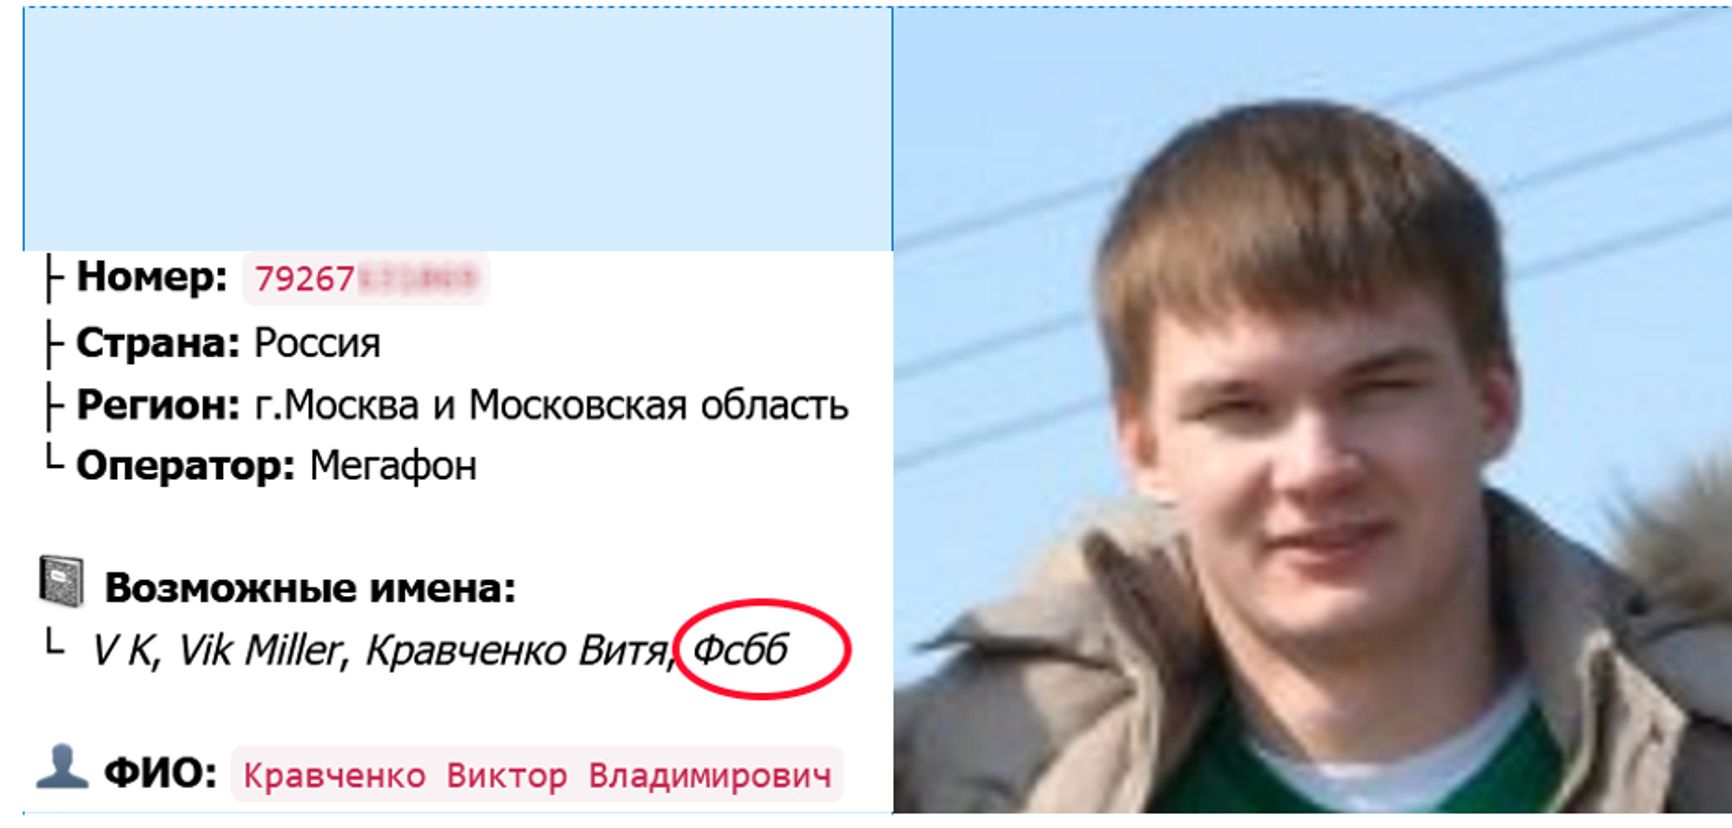 On the left, you may see how other users referred to Kravchenko in their contact lists ("Fsbb")